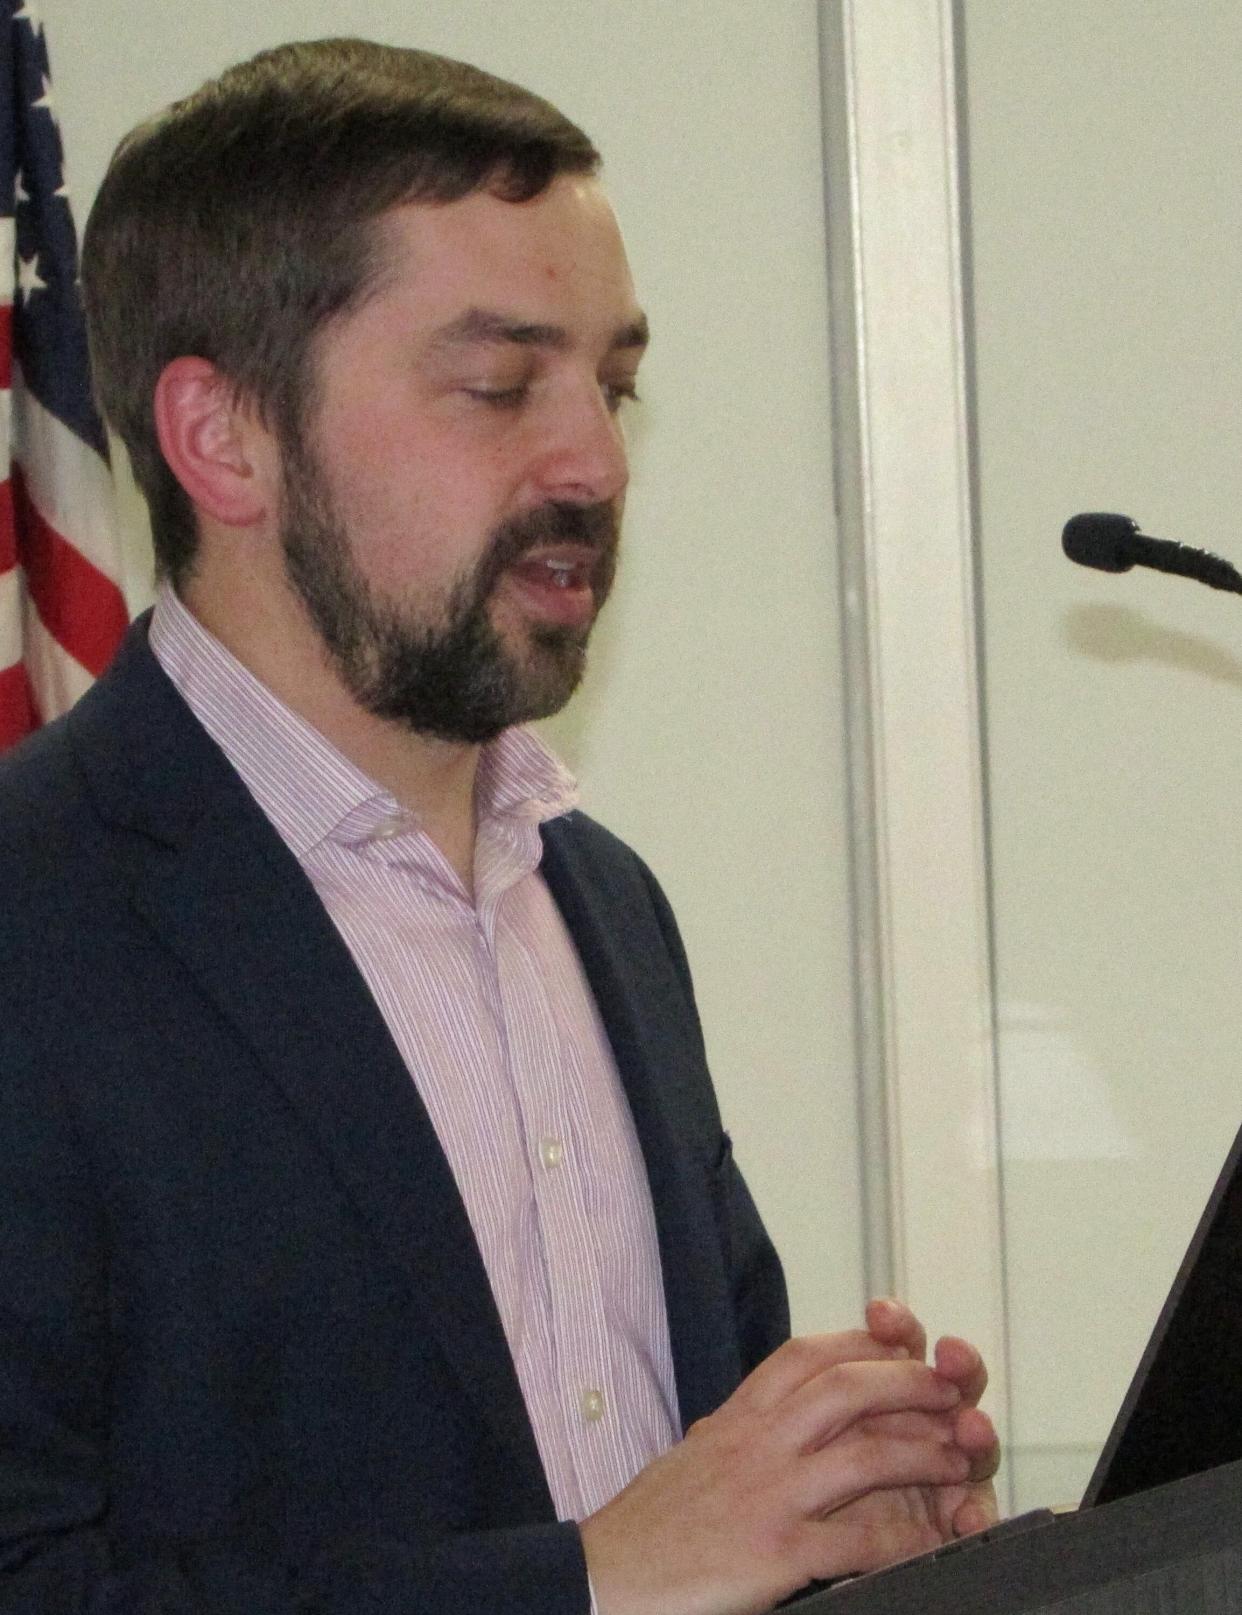 “We as a region lack competition in terms of broadband service, and a result of that is having the highest internet prices of any of the regions in Massachusetts,” said Steven Tupper, deputy director of Cape Cod Commission. In the 2023 photo, Tupper speaks at a Bourne workshop on the town's digital equity planning.